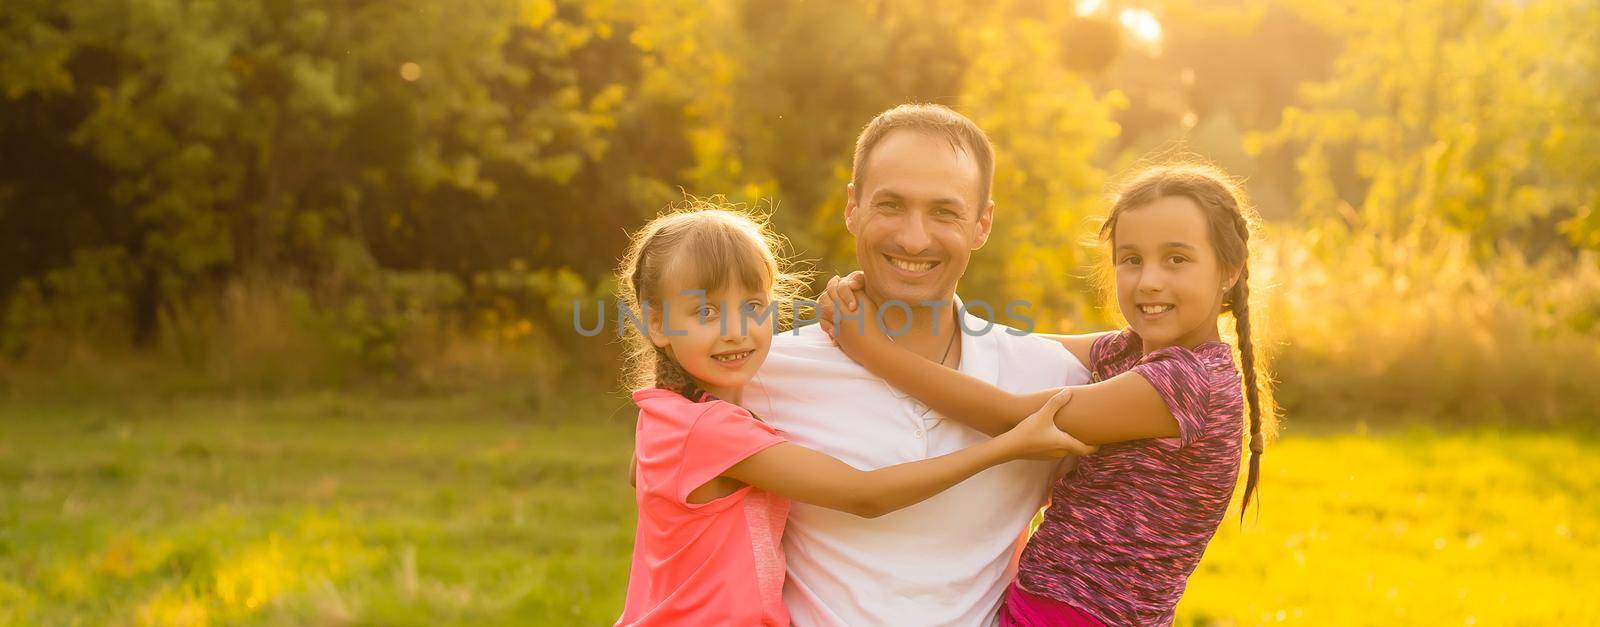 Happy loving family, dad playing with two little cute daughters outdoors at sunset, family relationship and friendship concept. by Andelov13